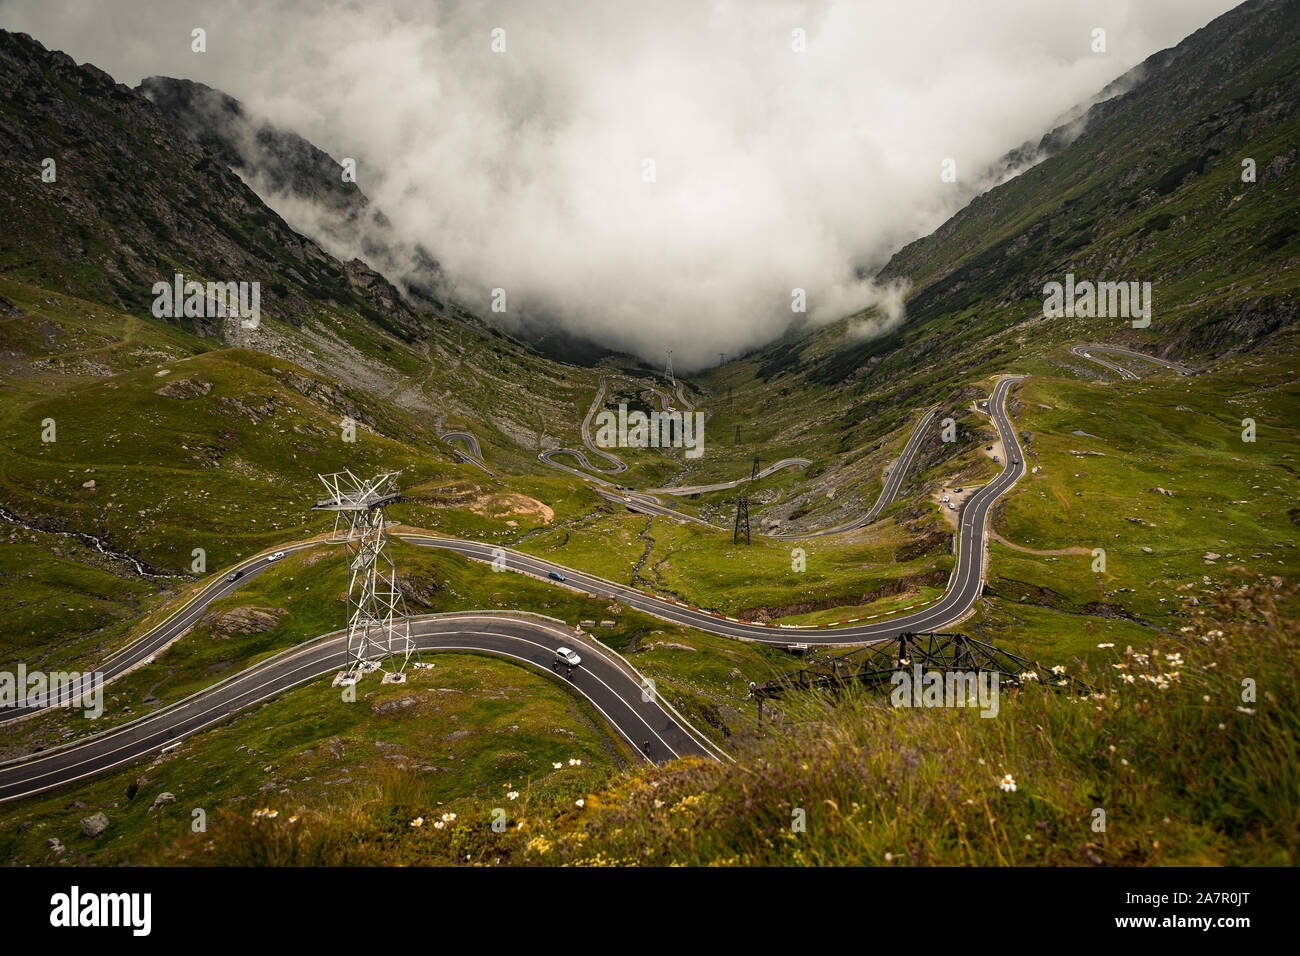 Top gear best road in europe hi-res stock and images - Alamy